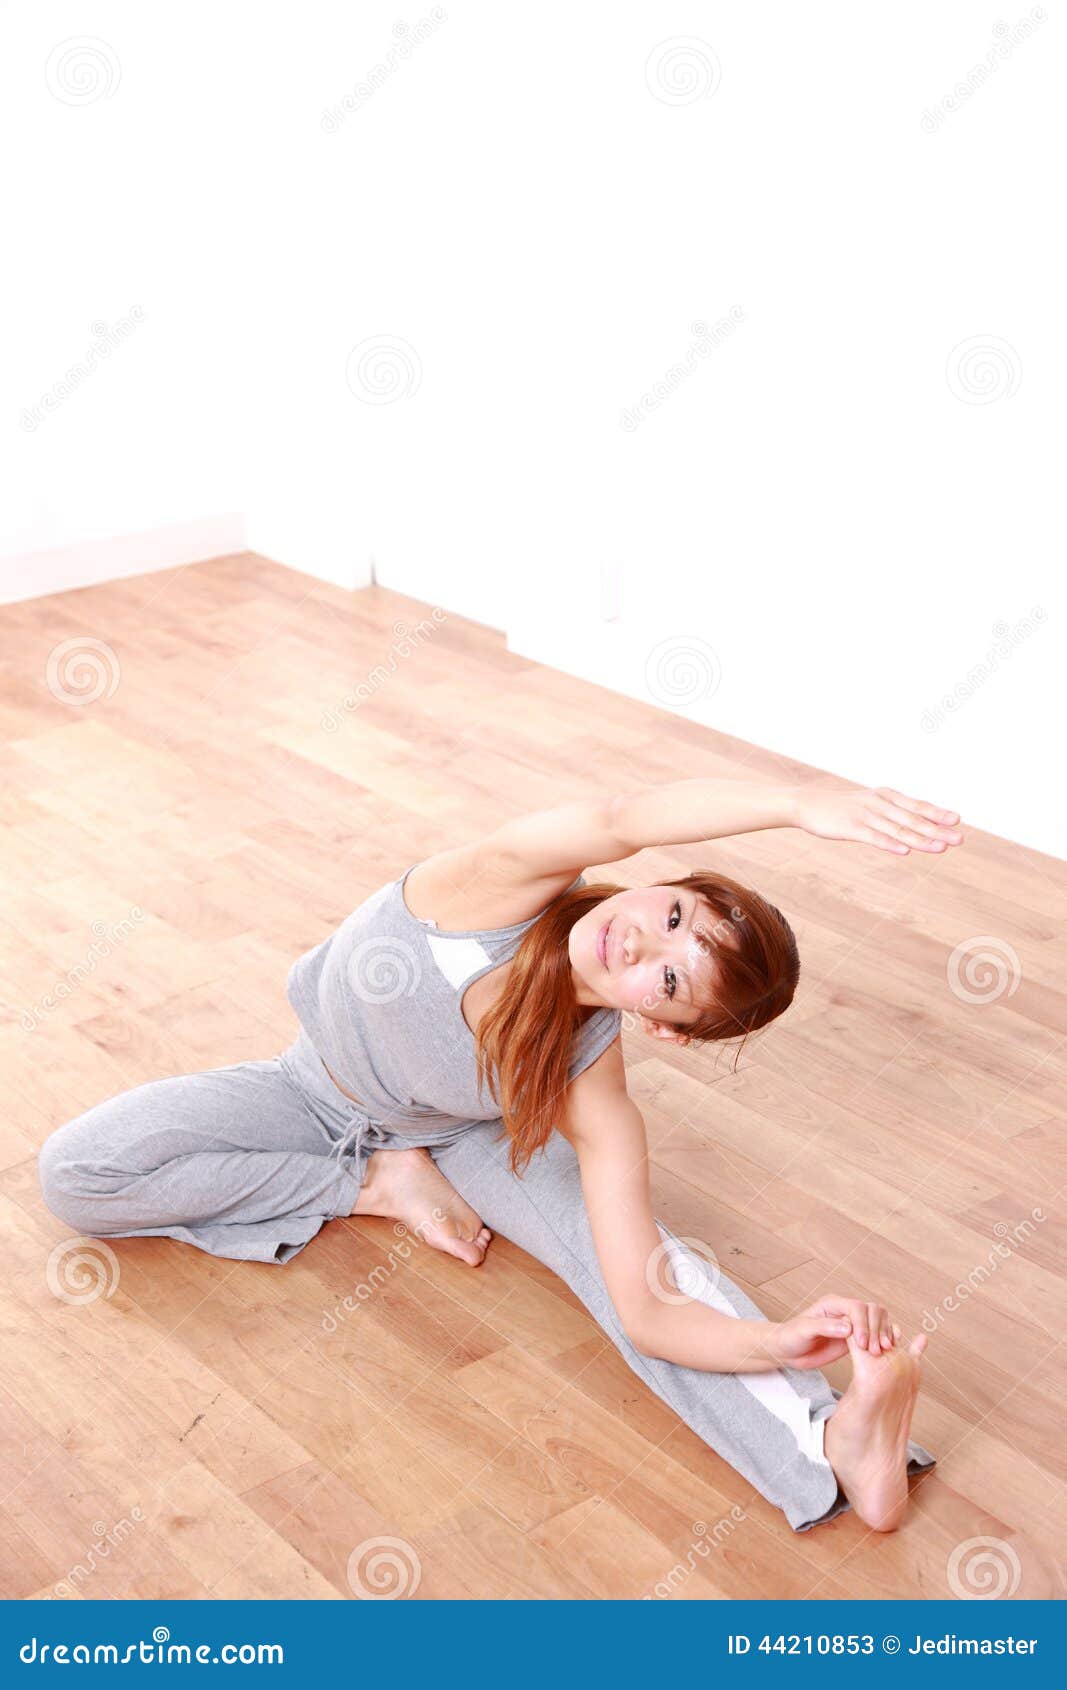 Japanese Woman Doing Stretch Stock Image Image Of Exercise